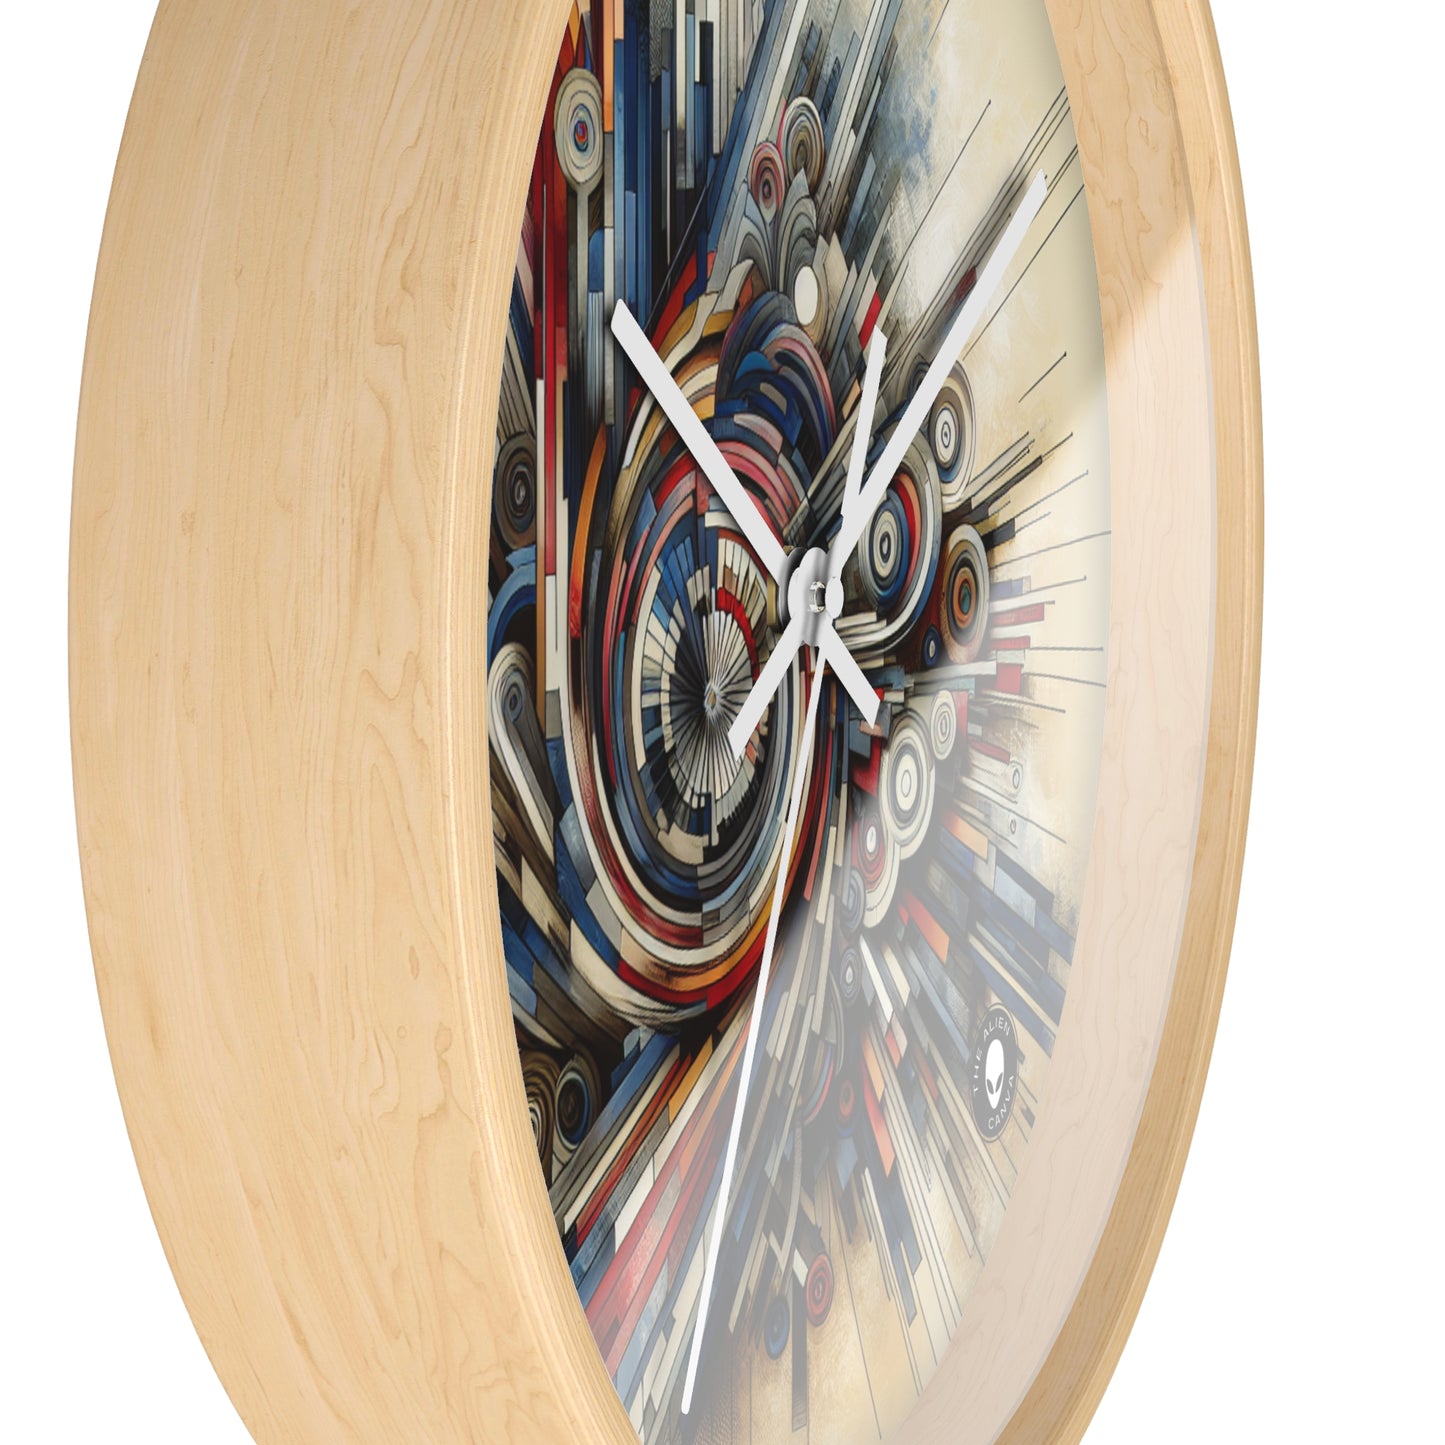 "Fragmented Realms: A Surreal Exploration in Color and Form" - The Alien Wall Clock Avant-garde Art